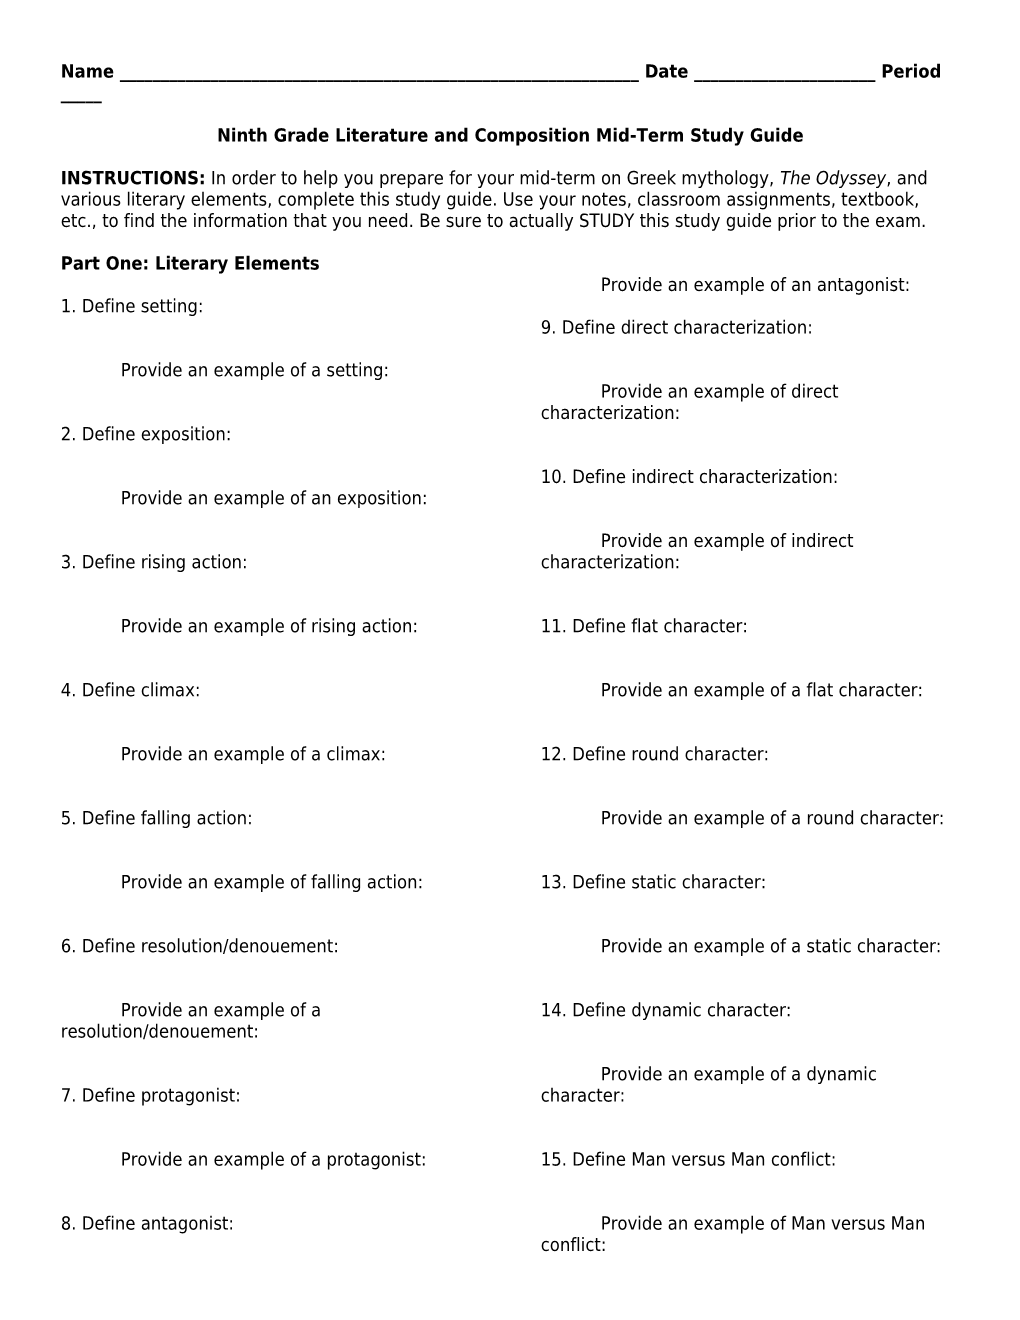 Ninth Grade Literature and Composition Mid-Term Study Guide